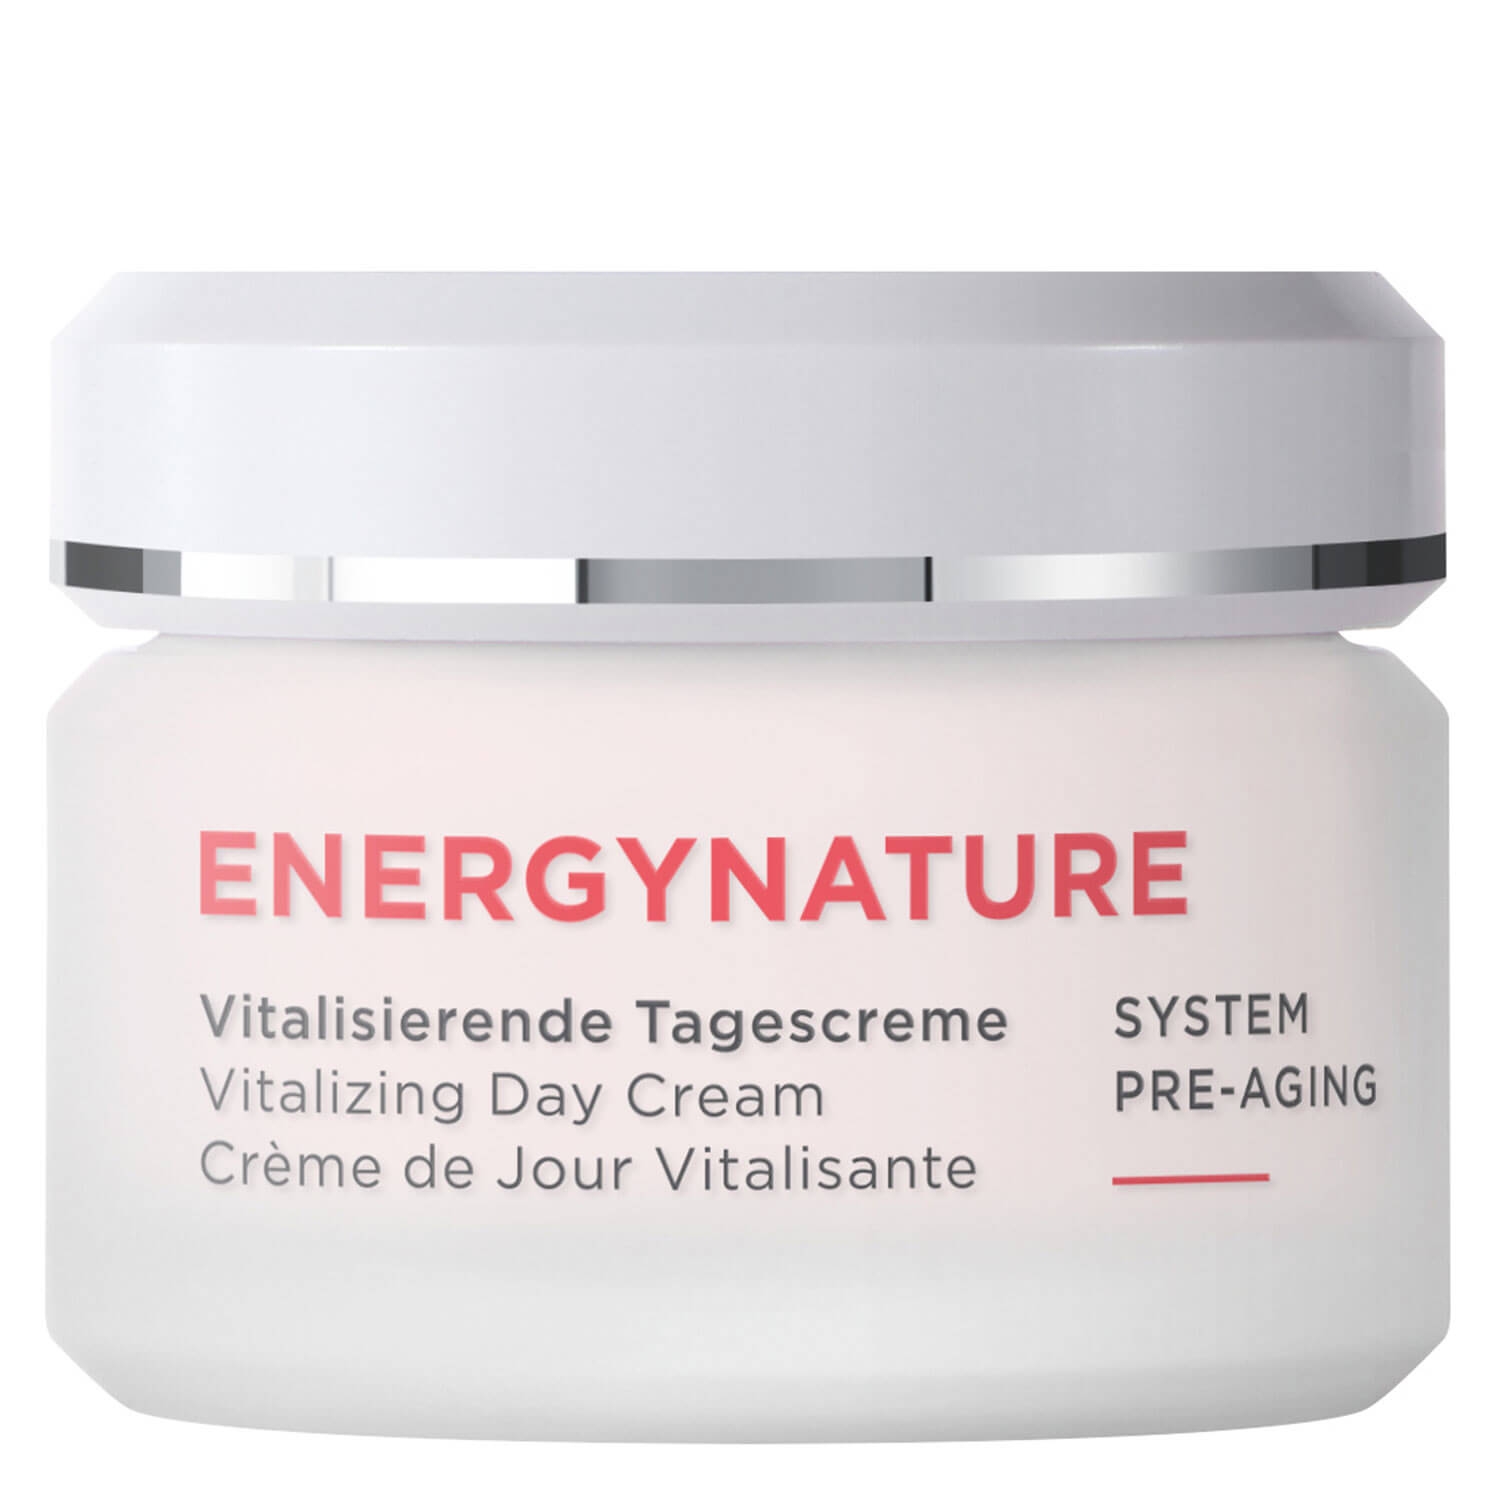 Product image from Energynature - Vitalisierende Tagescreme